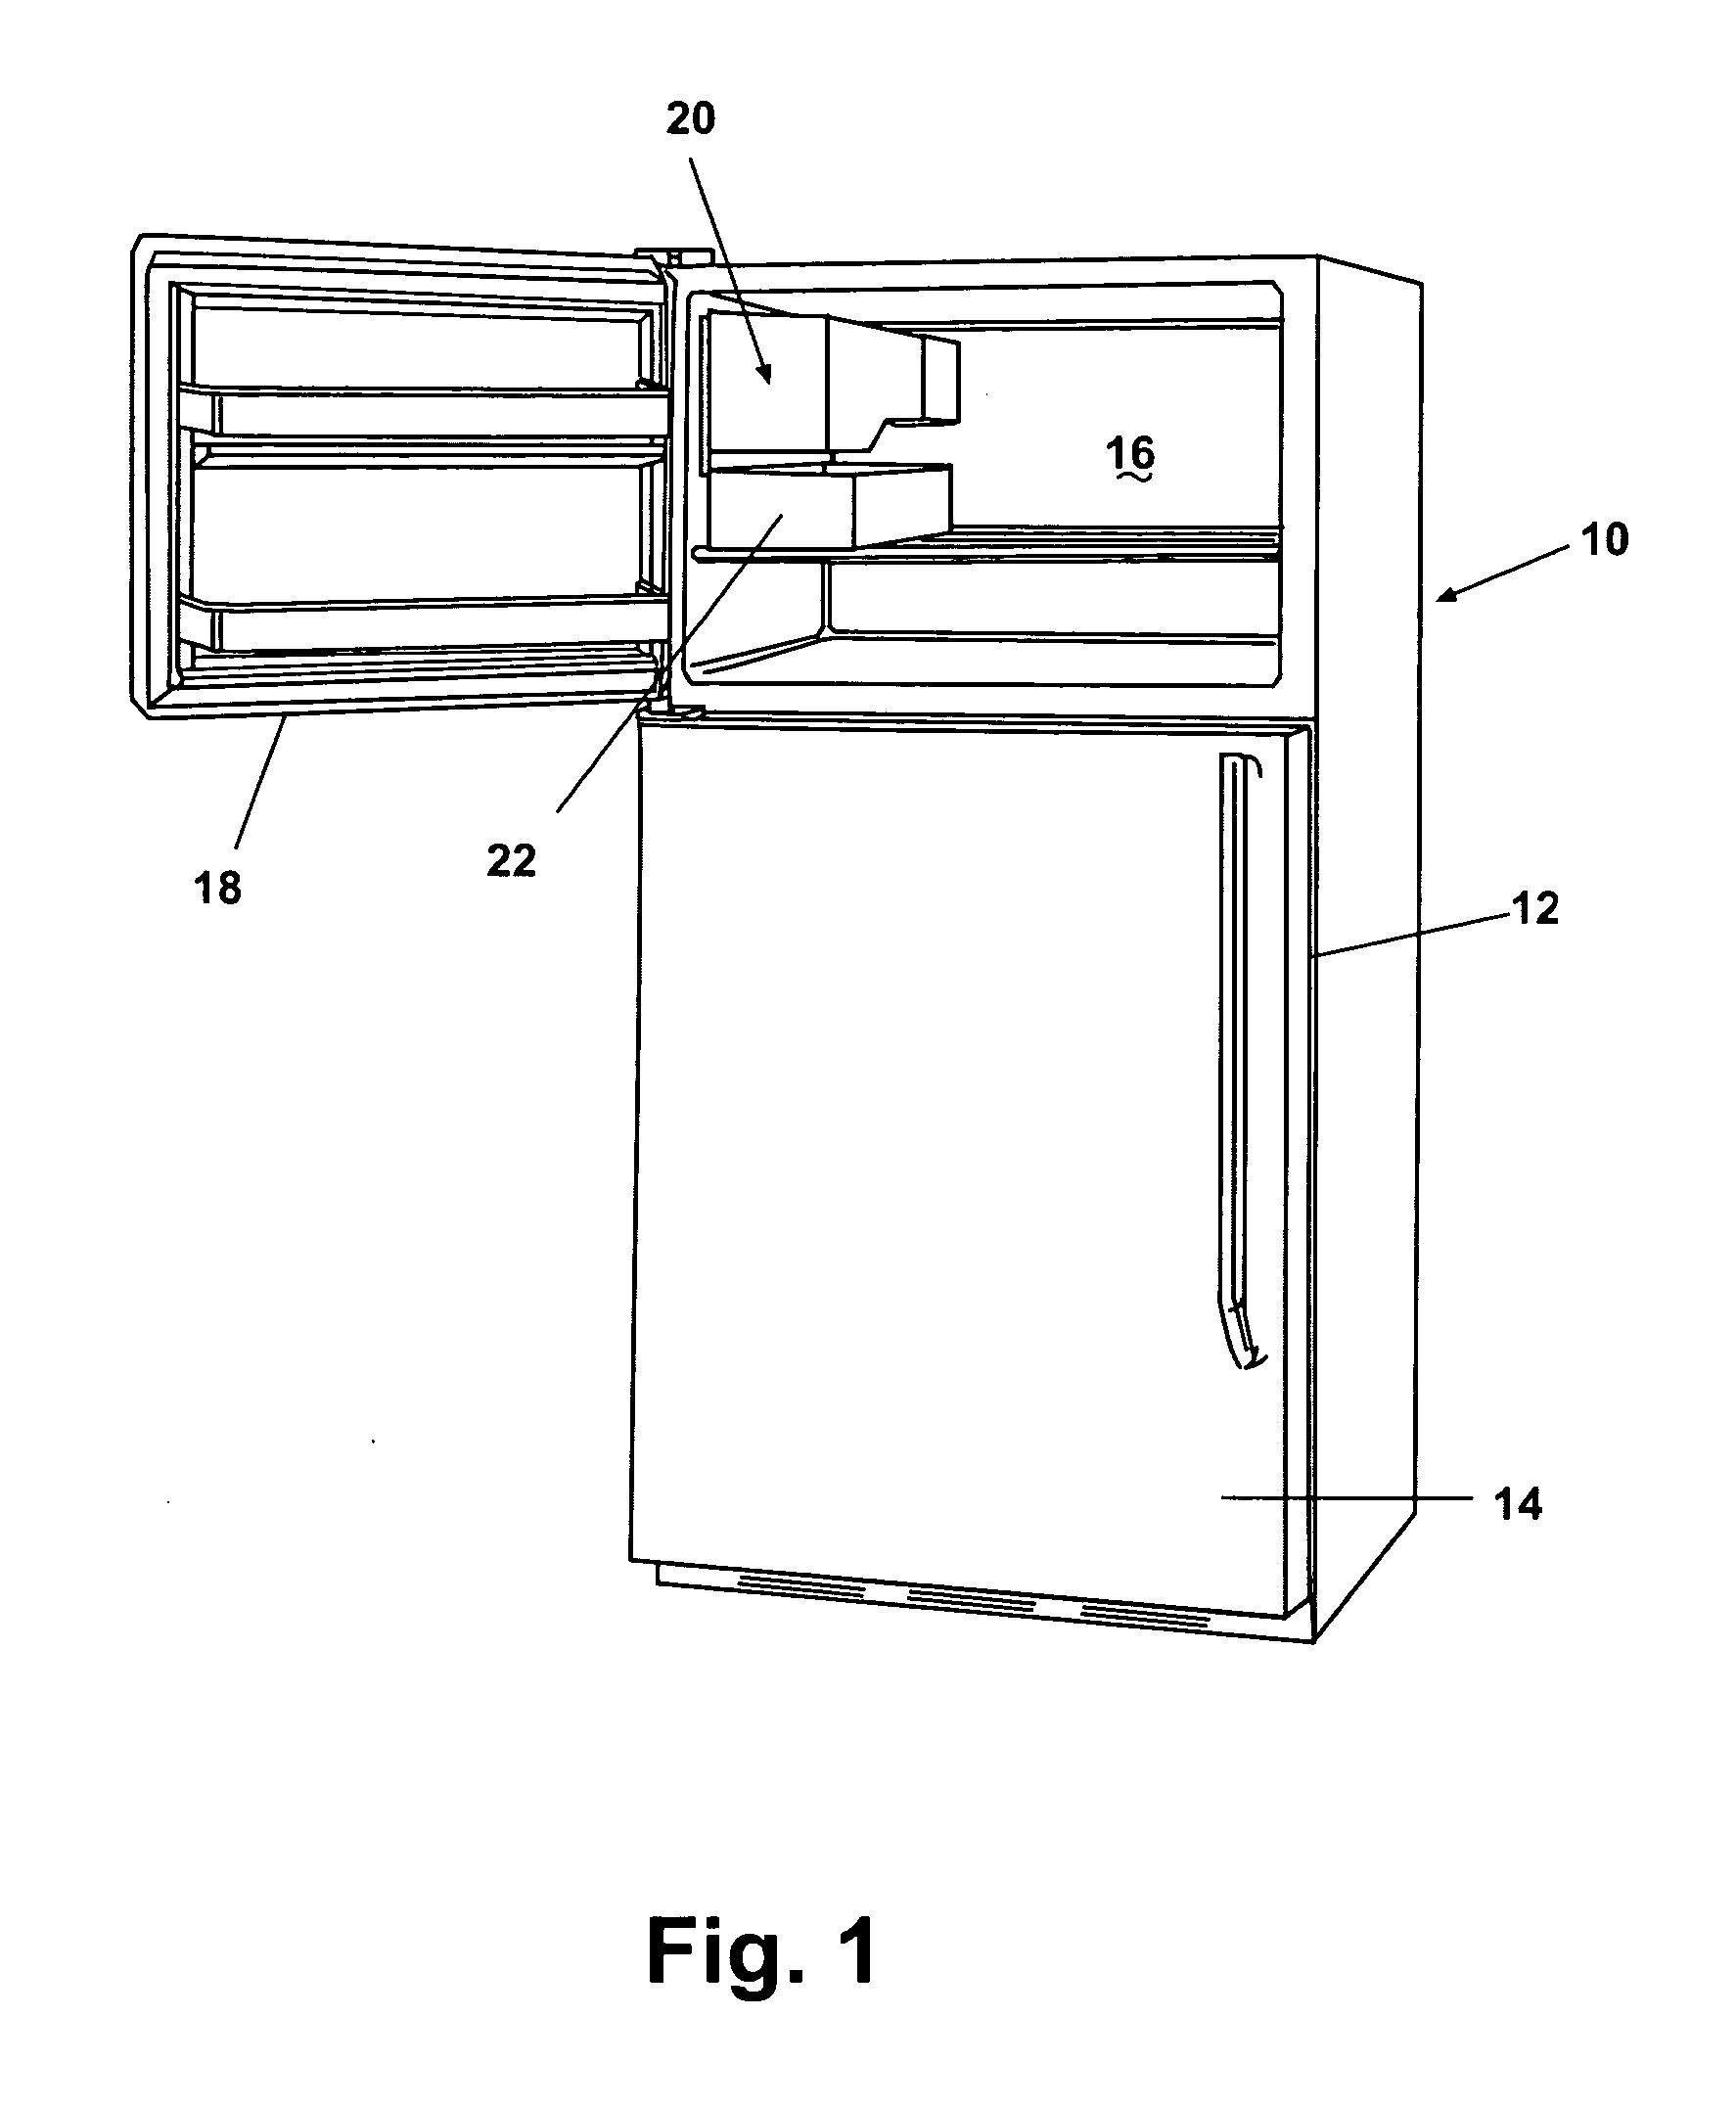 Method for making ice in a compact ice maker